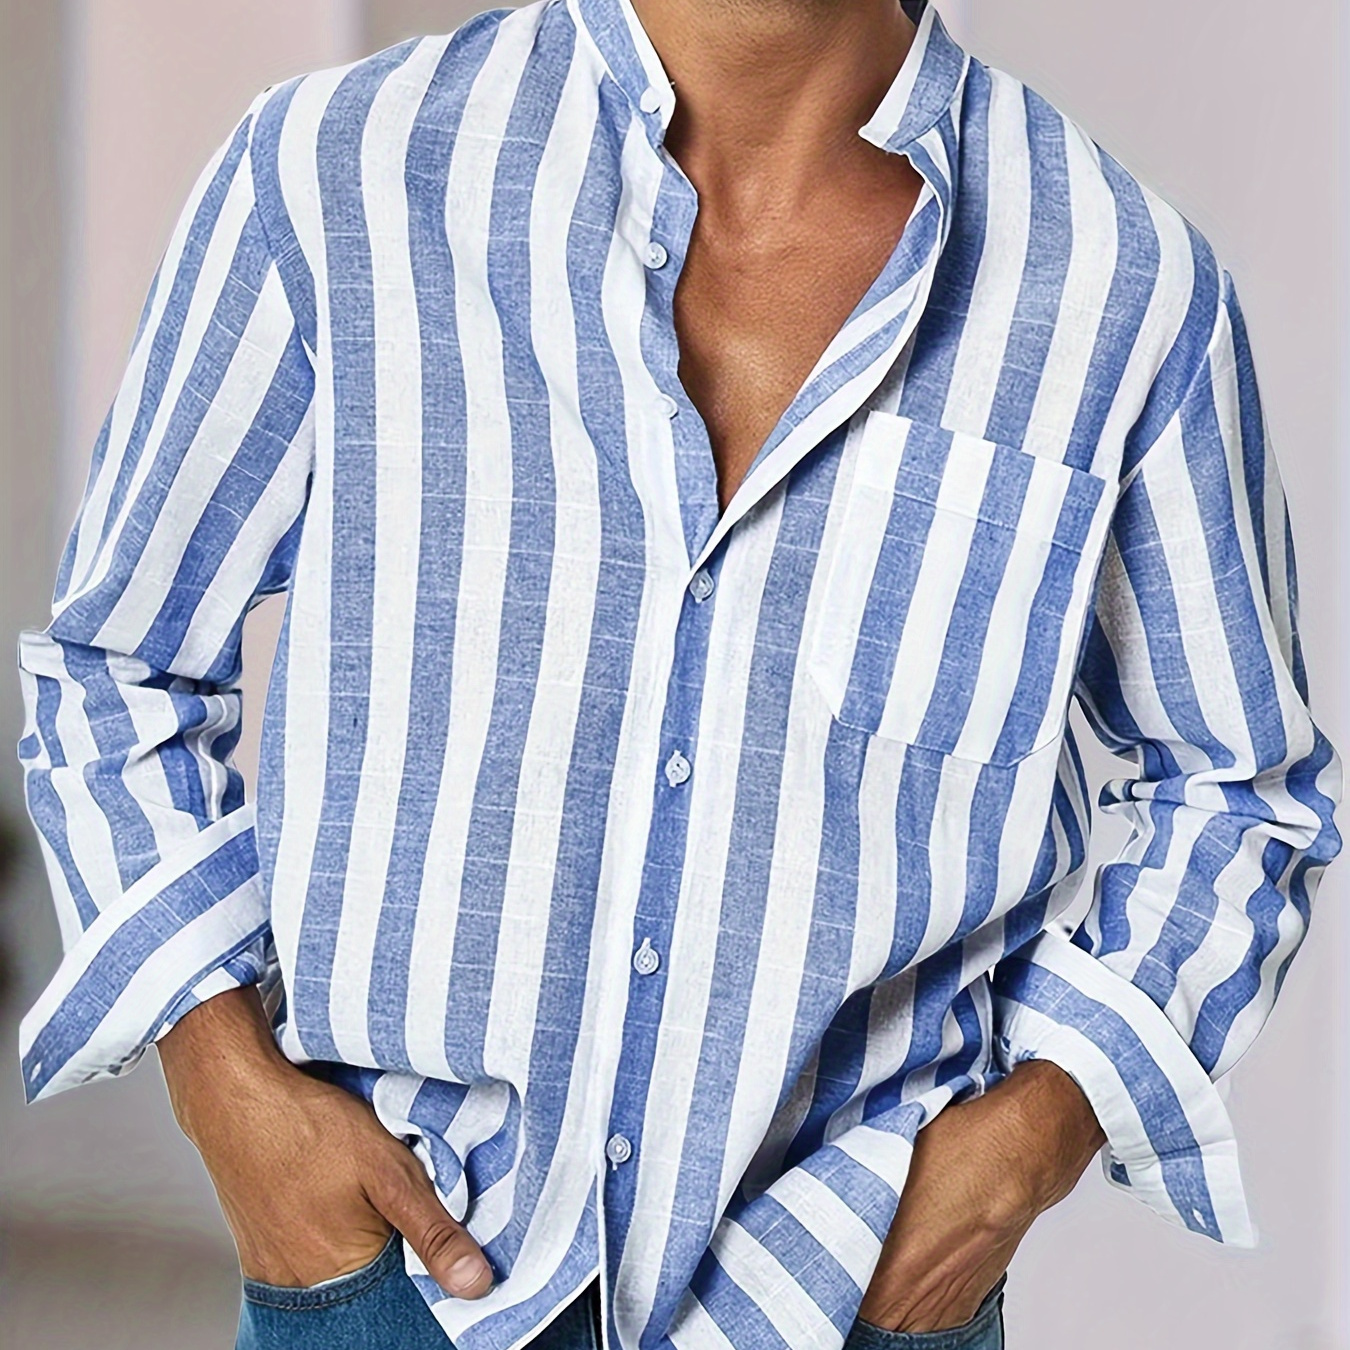 

Men's Casual Comfy Striped Long Sleeve Lapel Shirt, Chic Button Up Chest Pocket Shirt